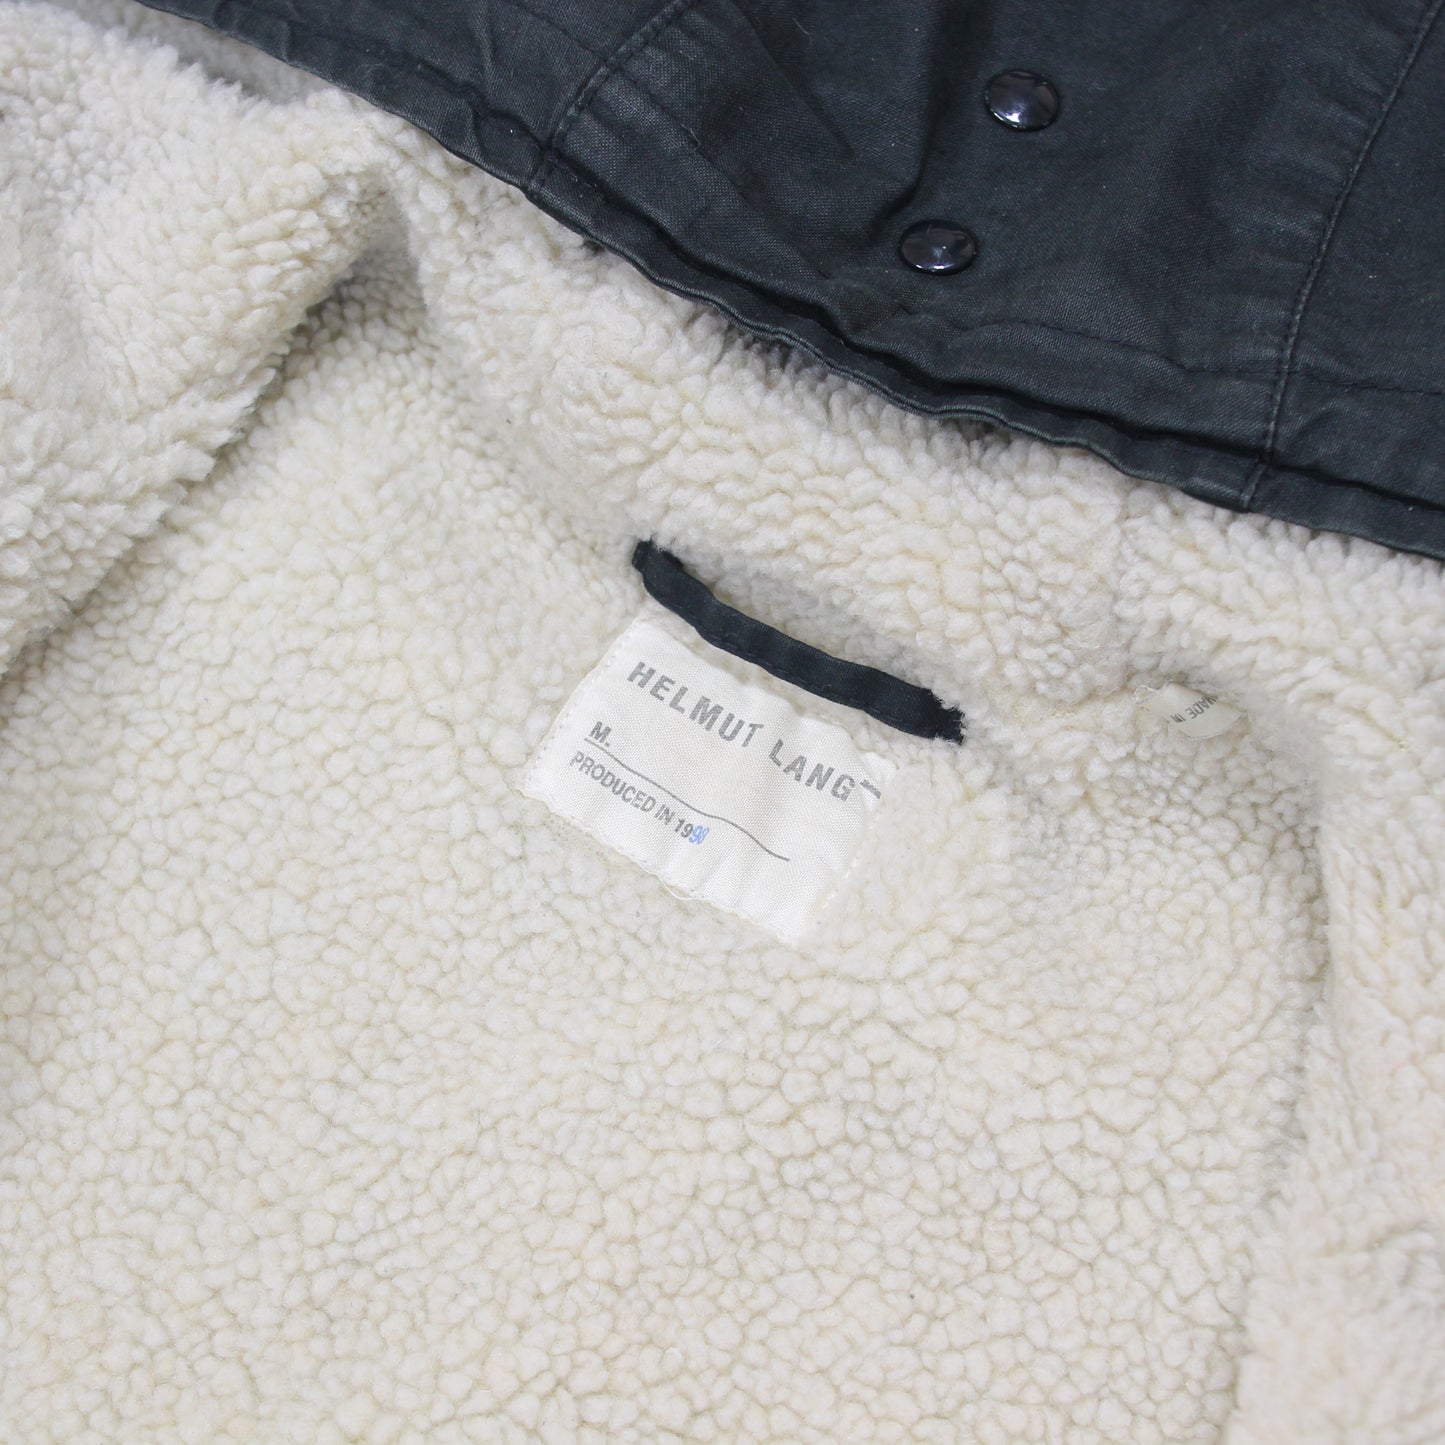 Helmut Lang shearling lined parka A/W98 46/Small